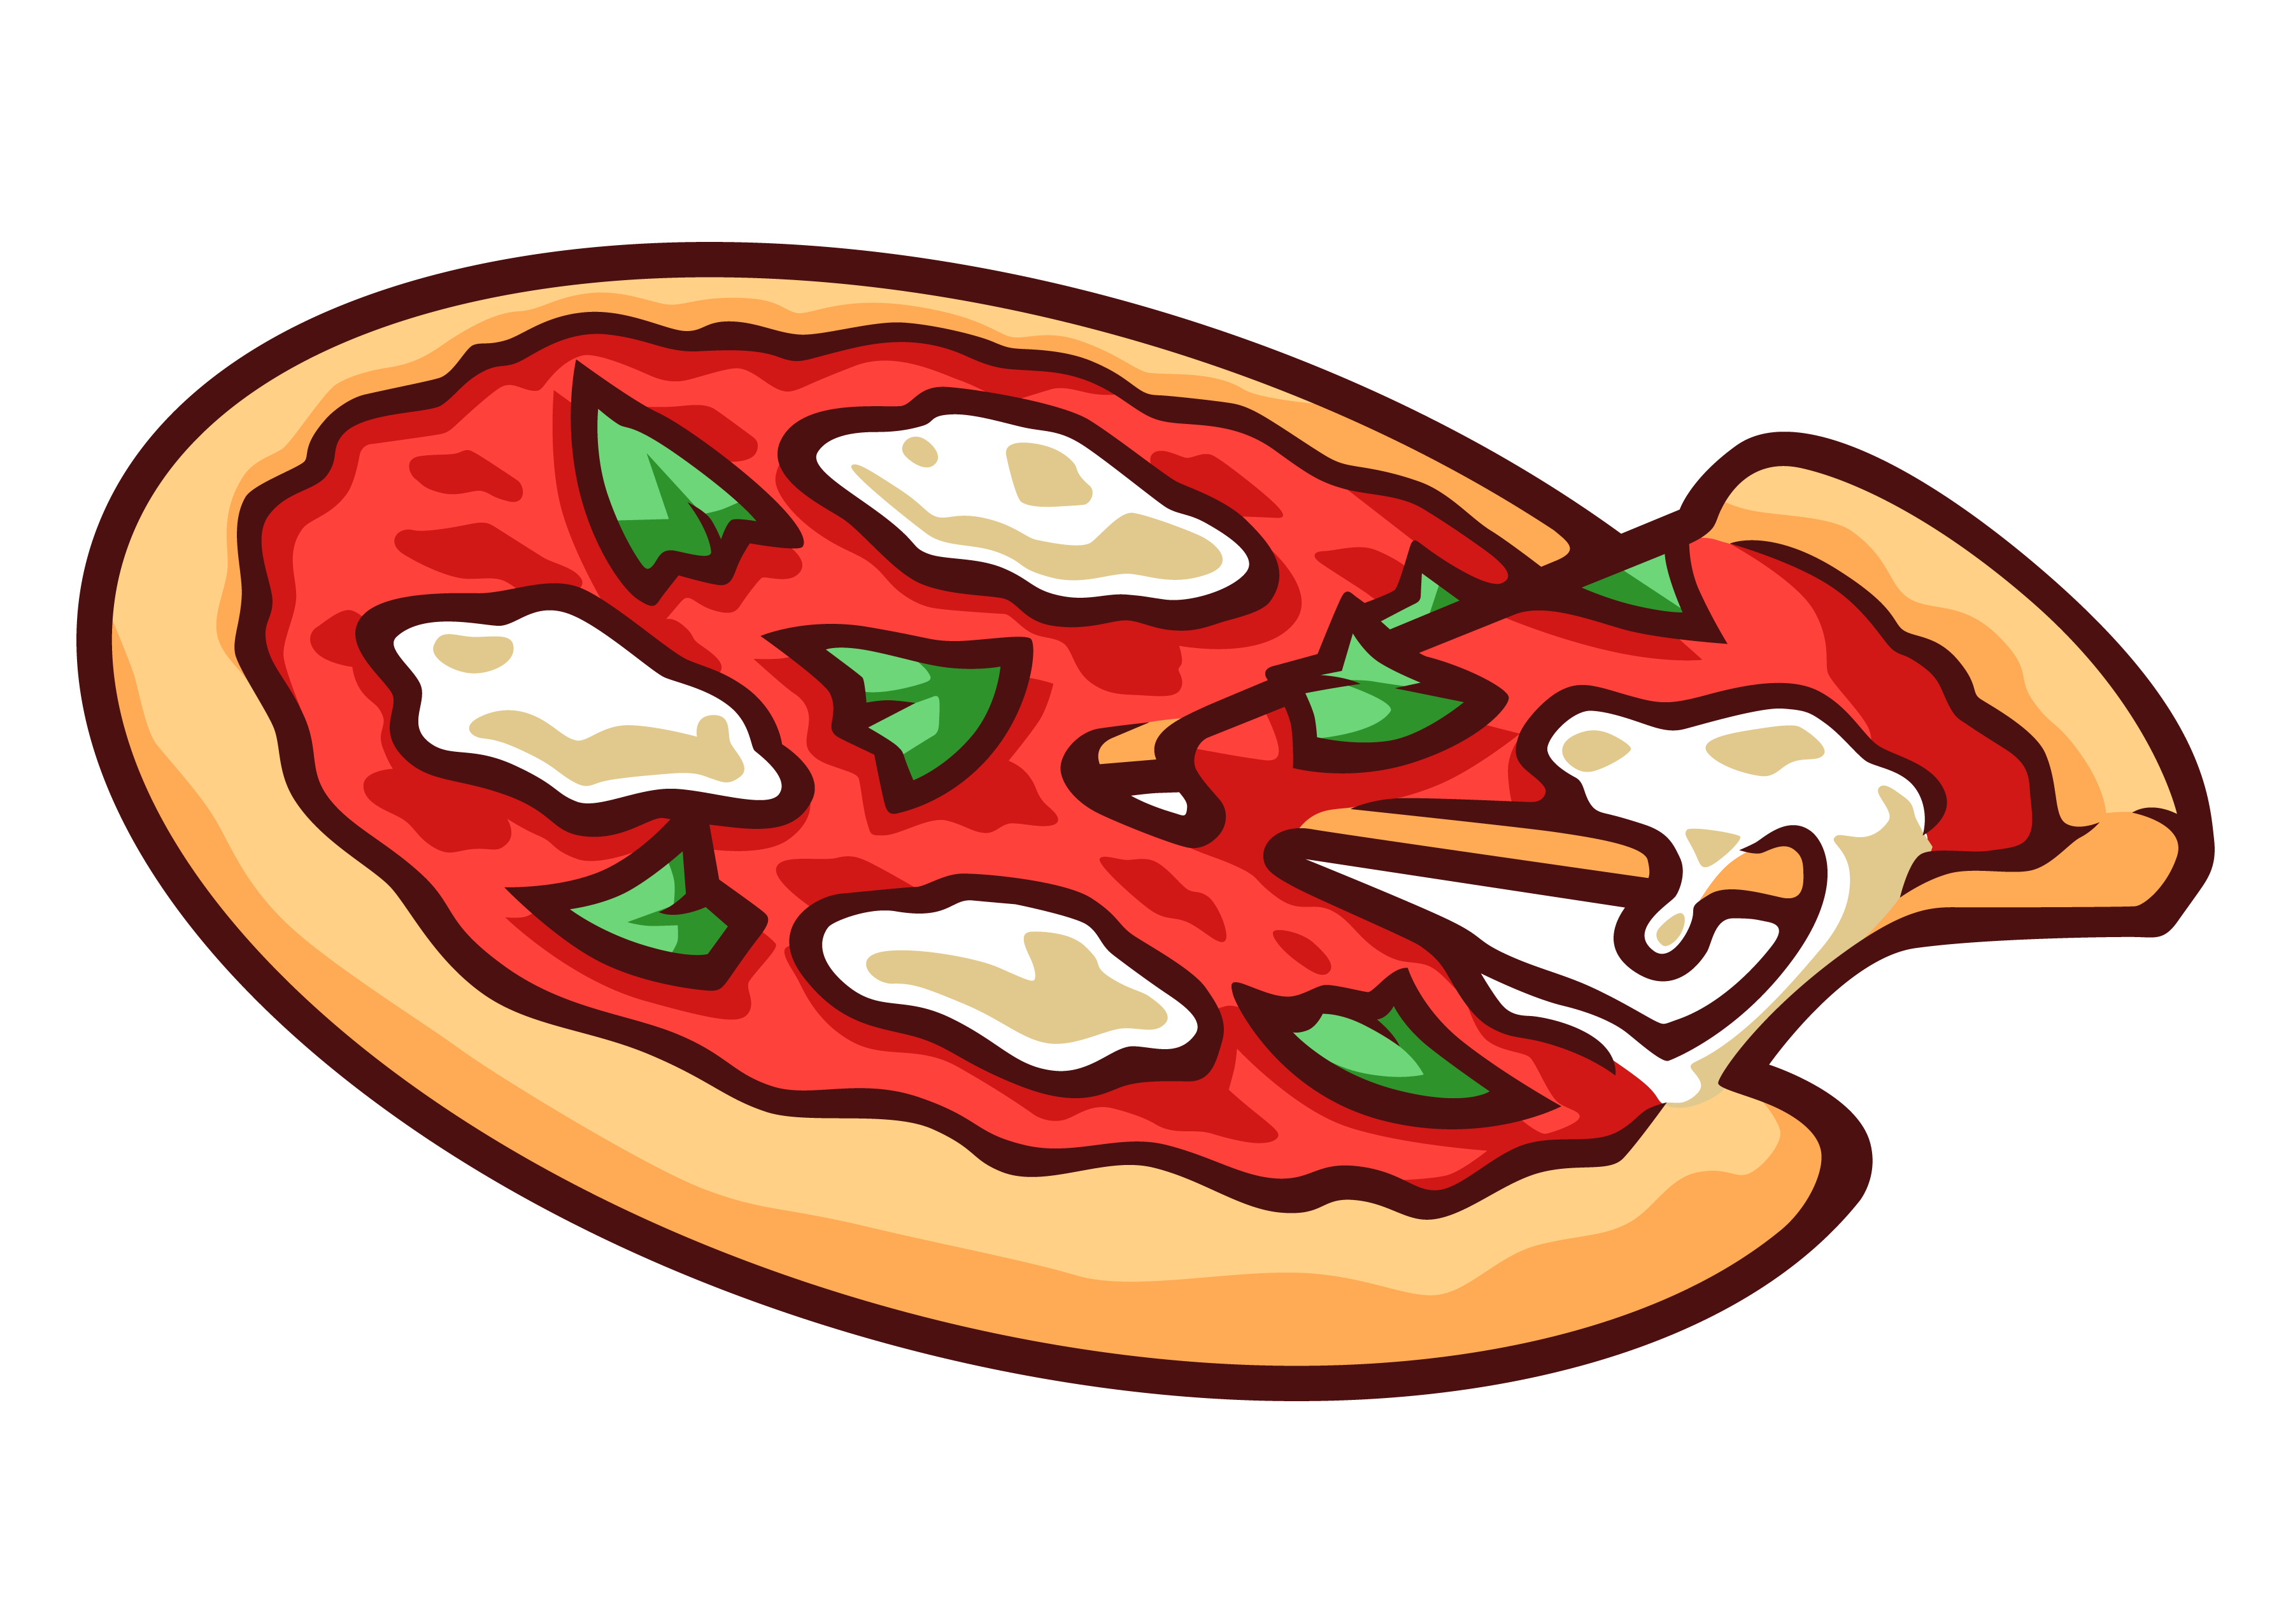 Clipart Pizza Cartoon Clipart Pizza Cartoon Transparent Free For Download On Webstockreview 2021 Pizza chef eps vectorby thomasamby127/23,887. clipart pizza cartoon clipart pizza